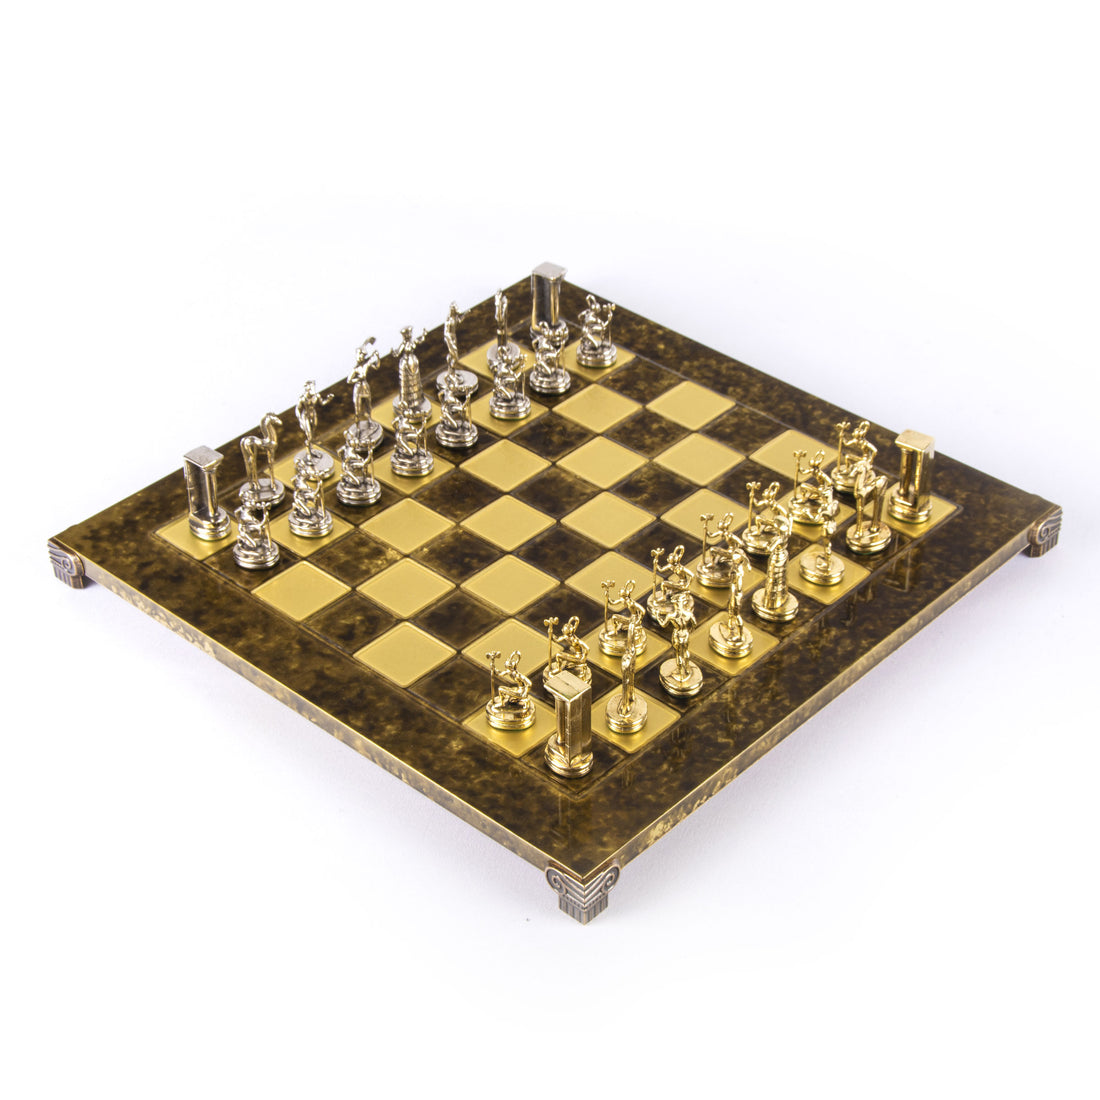 MINOAN WARRIOR CHESS SET with gold/silver chessmen and bronze chessboard 36 x 36cm (Medium) - Premium Chess from MANOPOULOS Chess & Backgammon - Just €210! Shop now at MANOPOULOS Chess & Backgammon